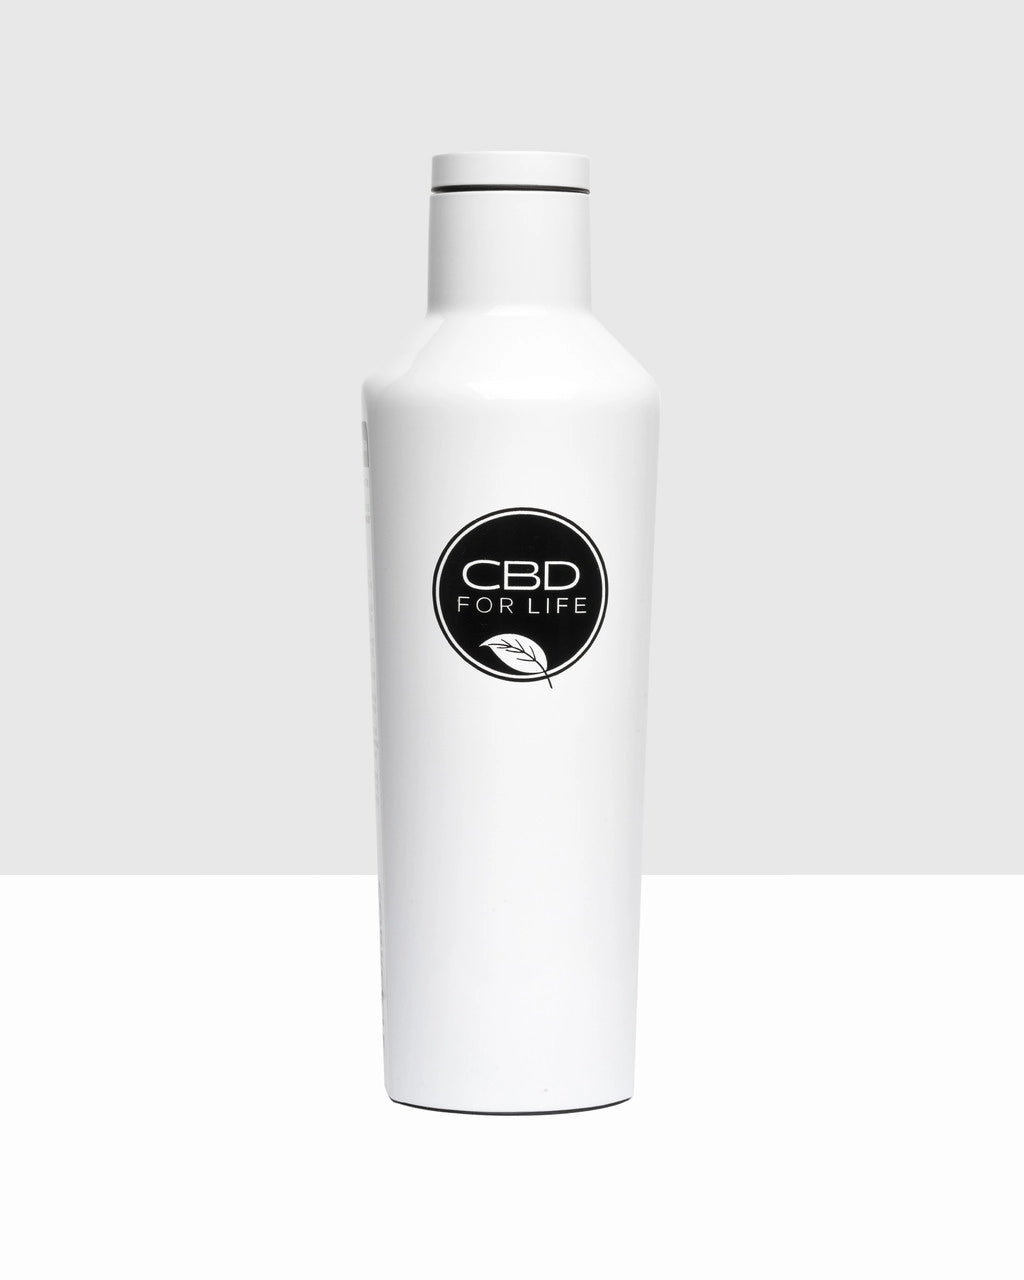 CBD For Life dipped canteen puts a cool, minimalist twist on the classic on-the-go water bottle. Available in white with matching, screw-on cap. Plus, it keeps drinks cold for 25 hours or hot for 12, so it's perfect for looking cool and staying cooler.